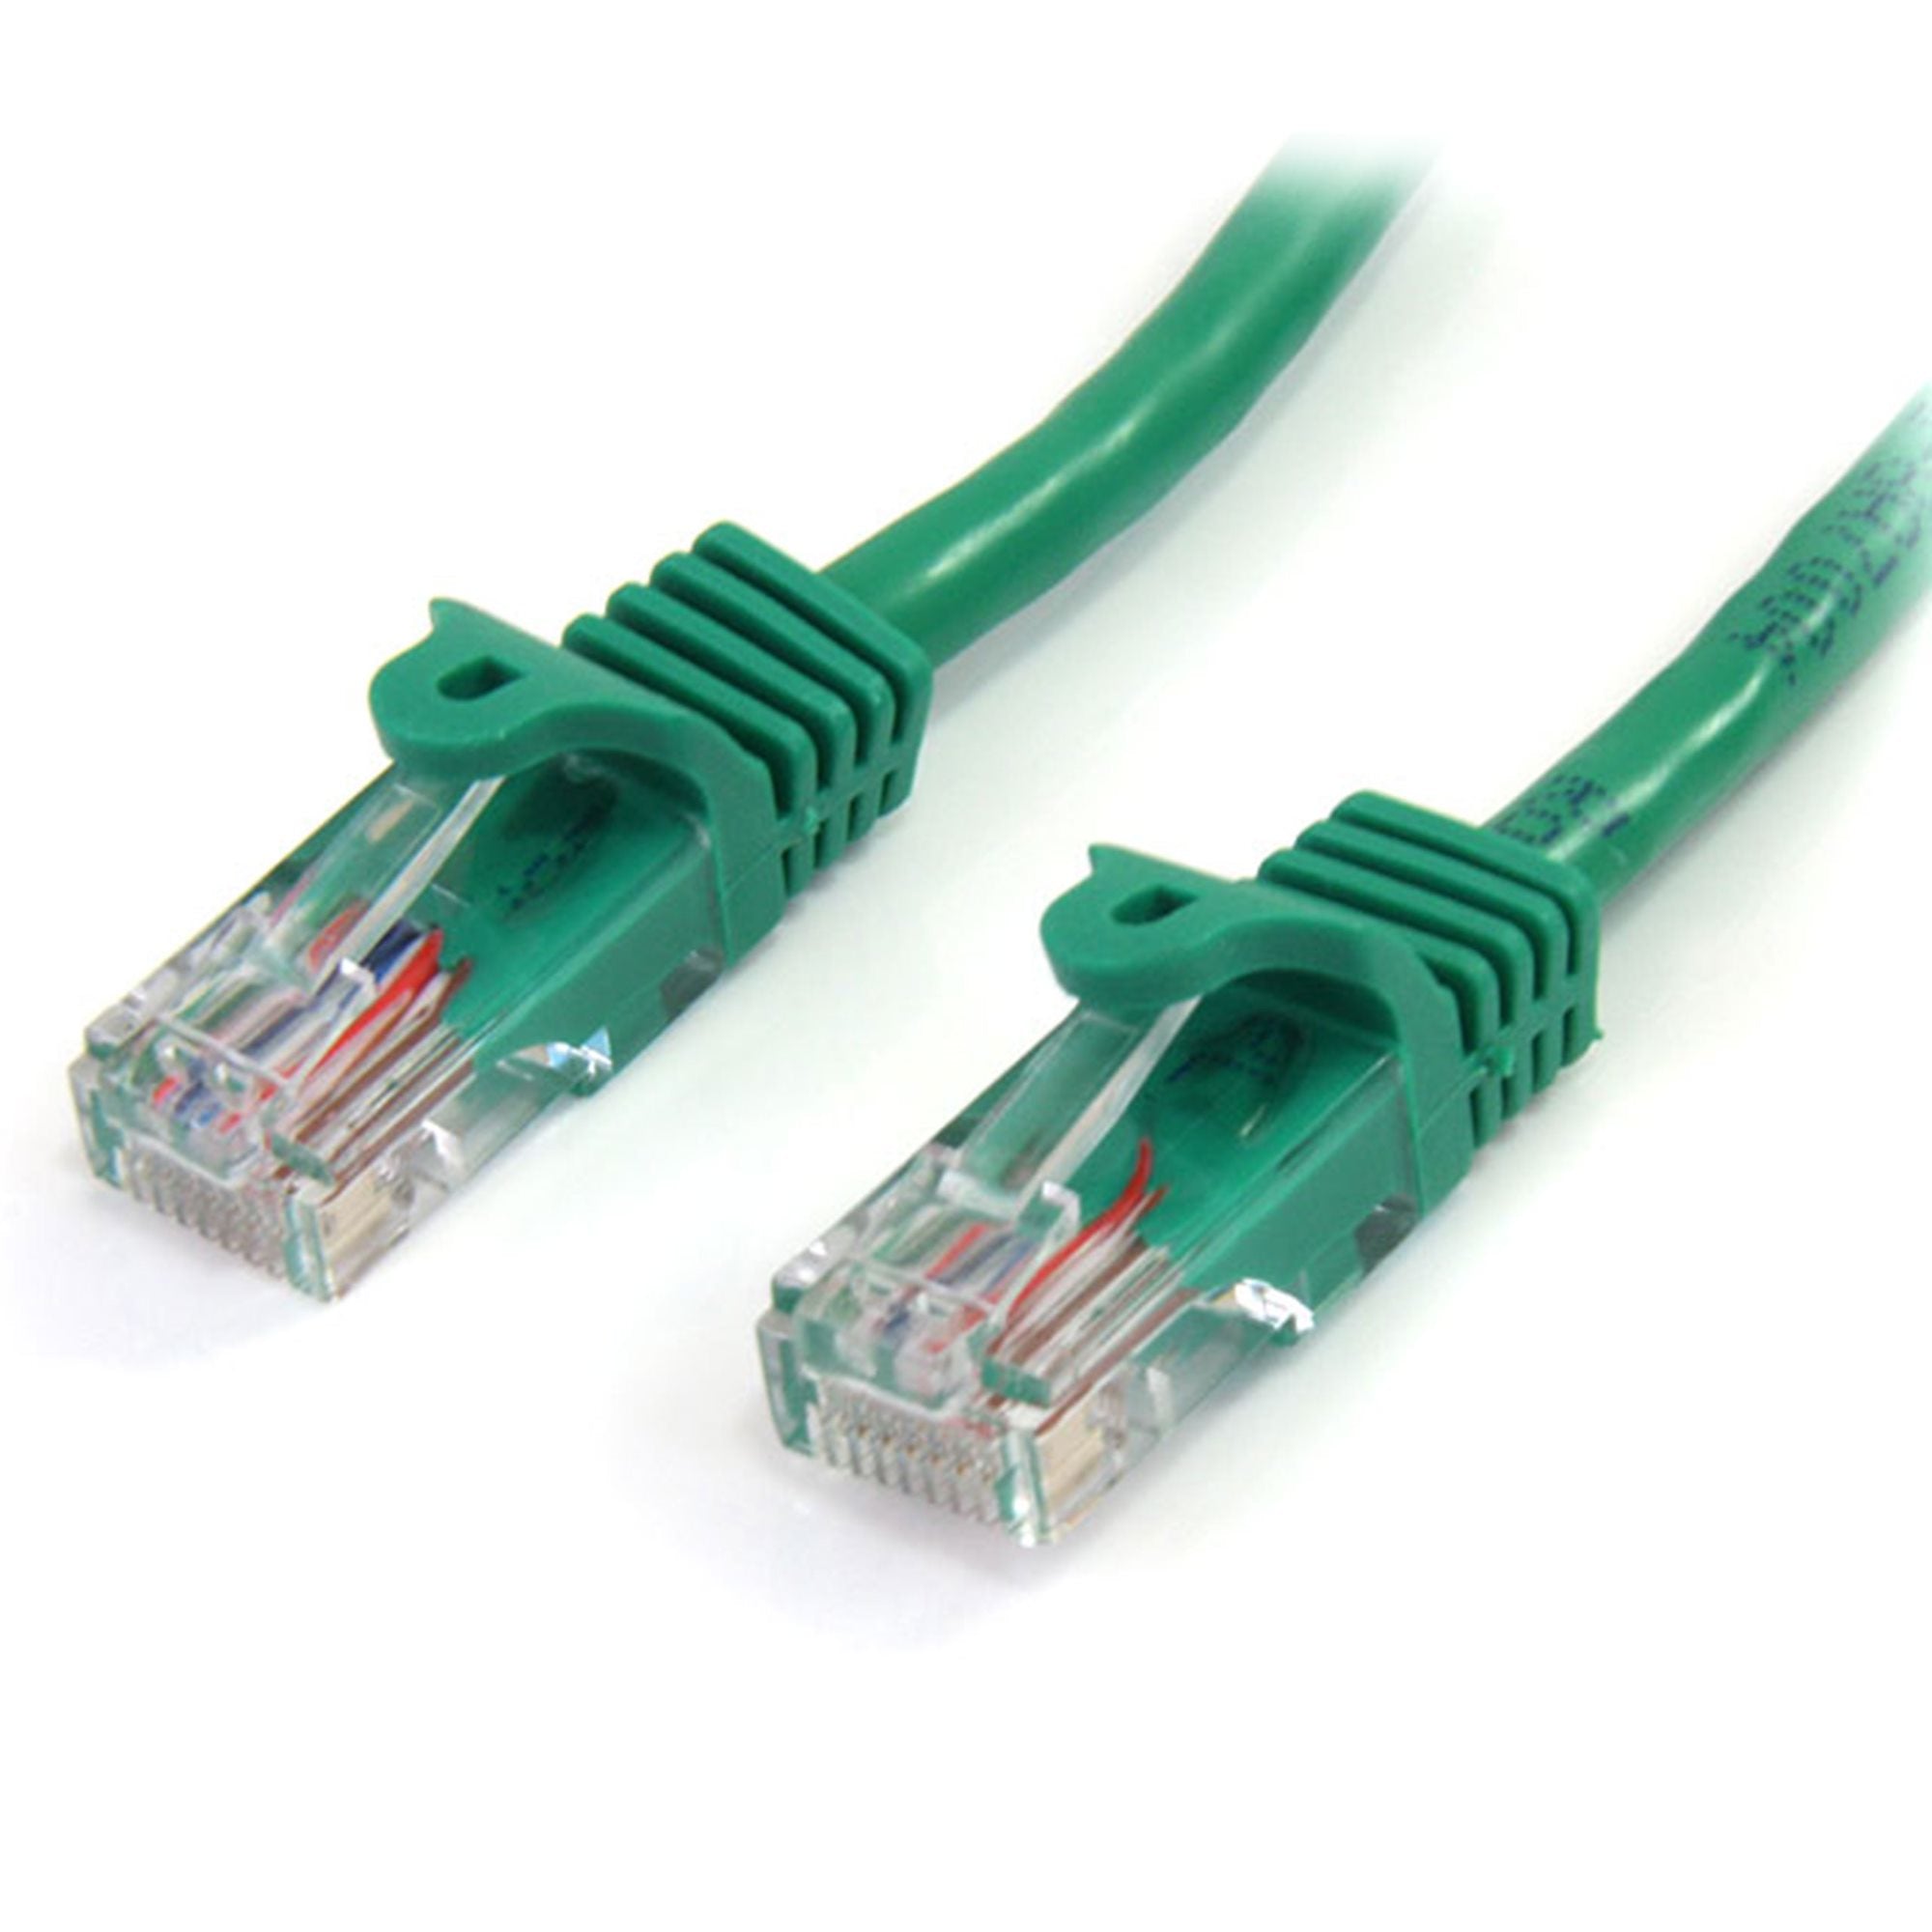 StarTech.com Cat5e Patch Cable with Snagless RJ45 Connectors - 1m, Green